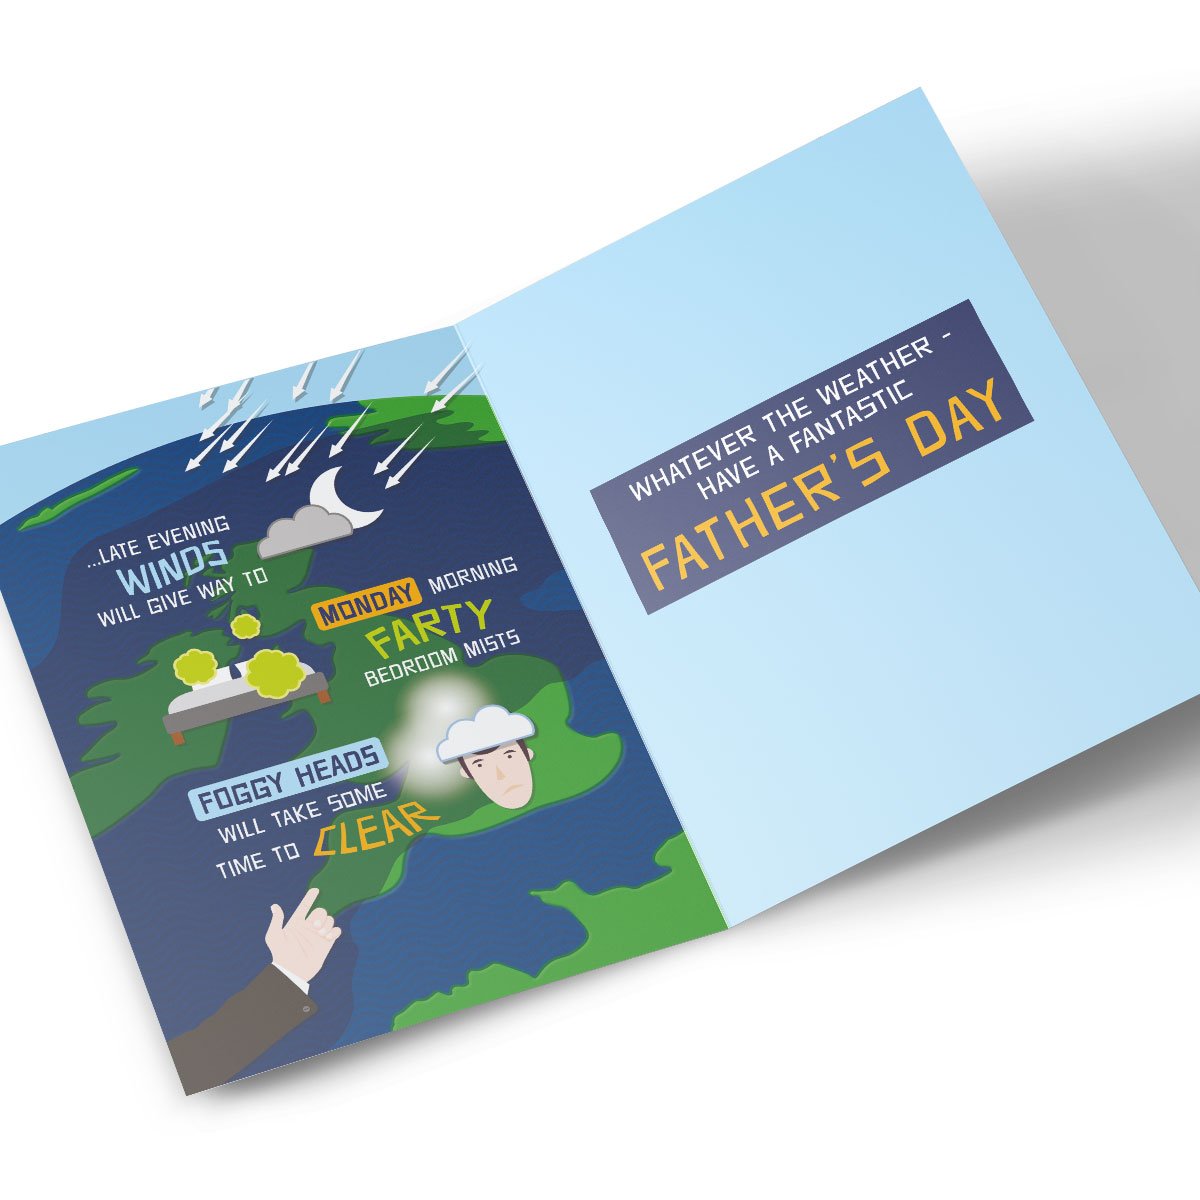 Personalised Father's Day Card - Forecast